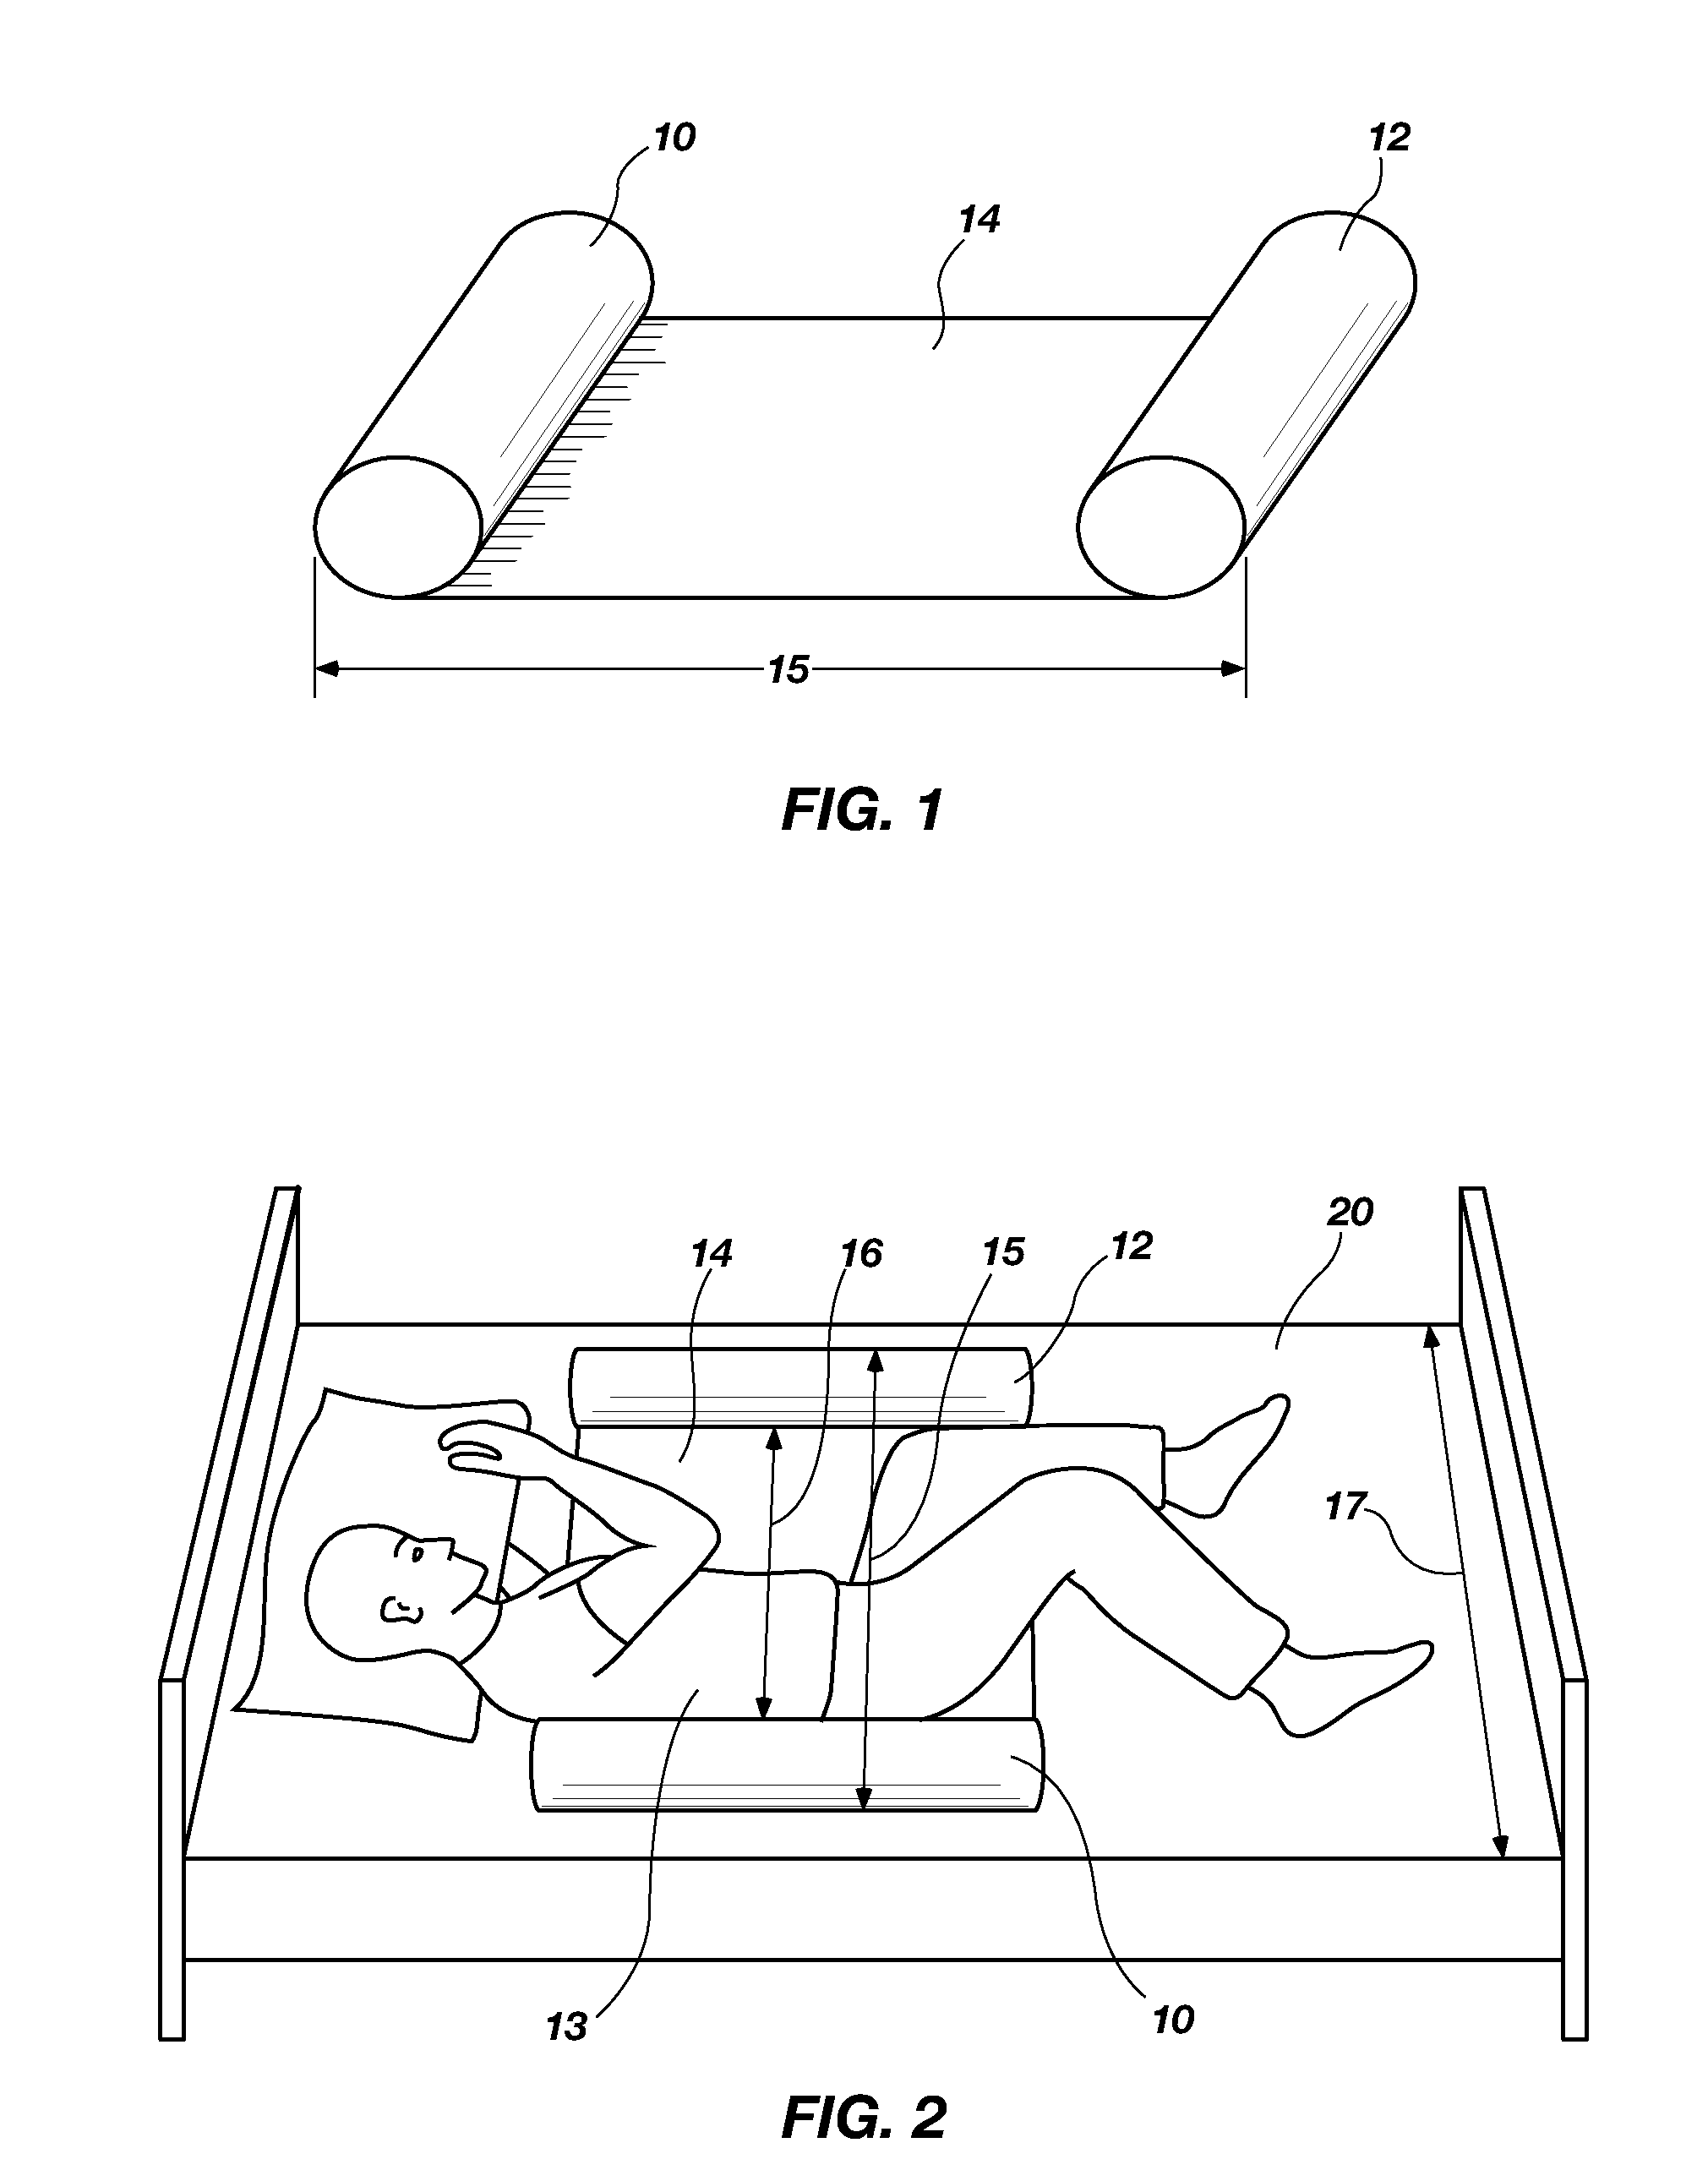 Suspended back pillow for sustaining a side sleeping position